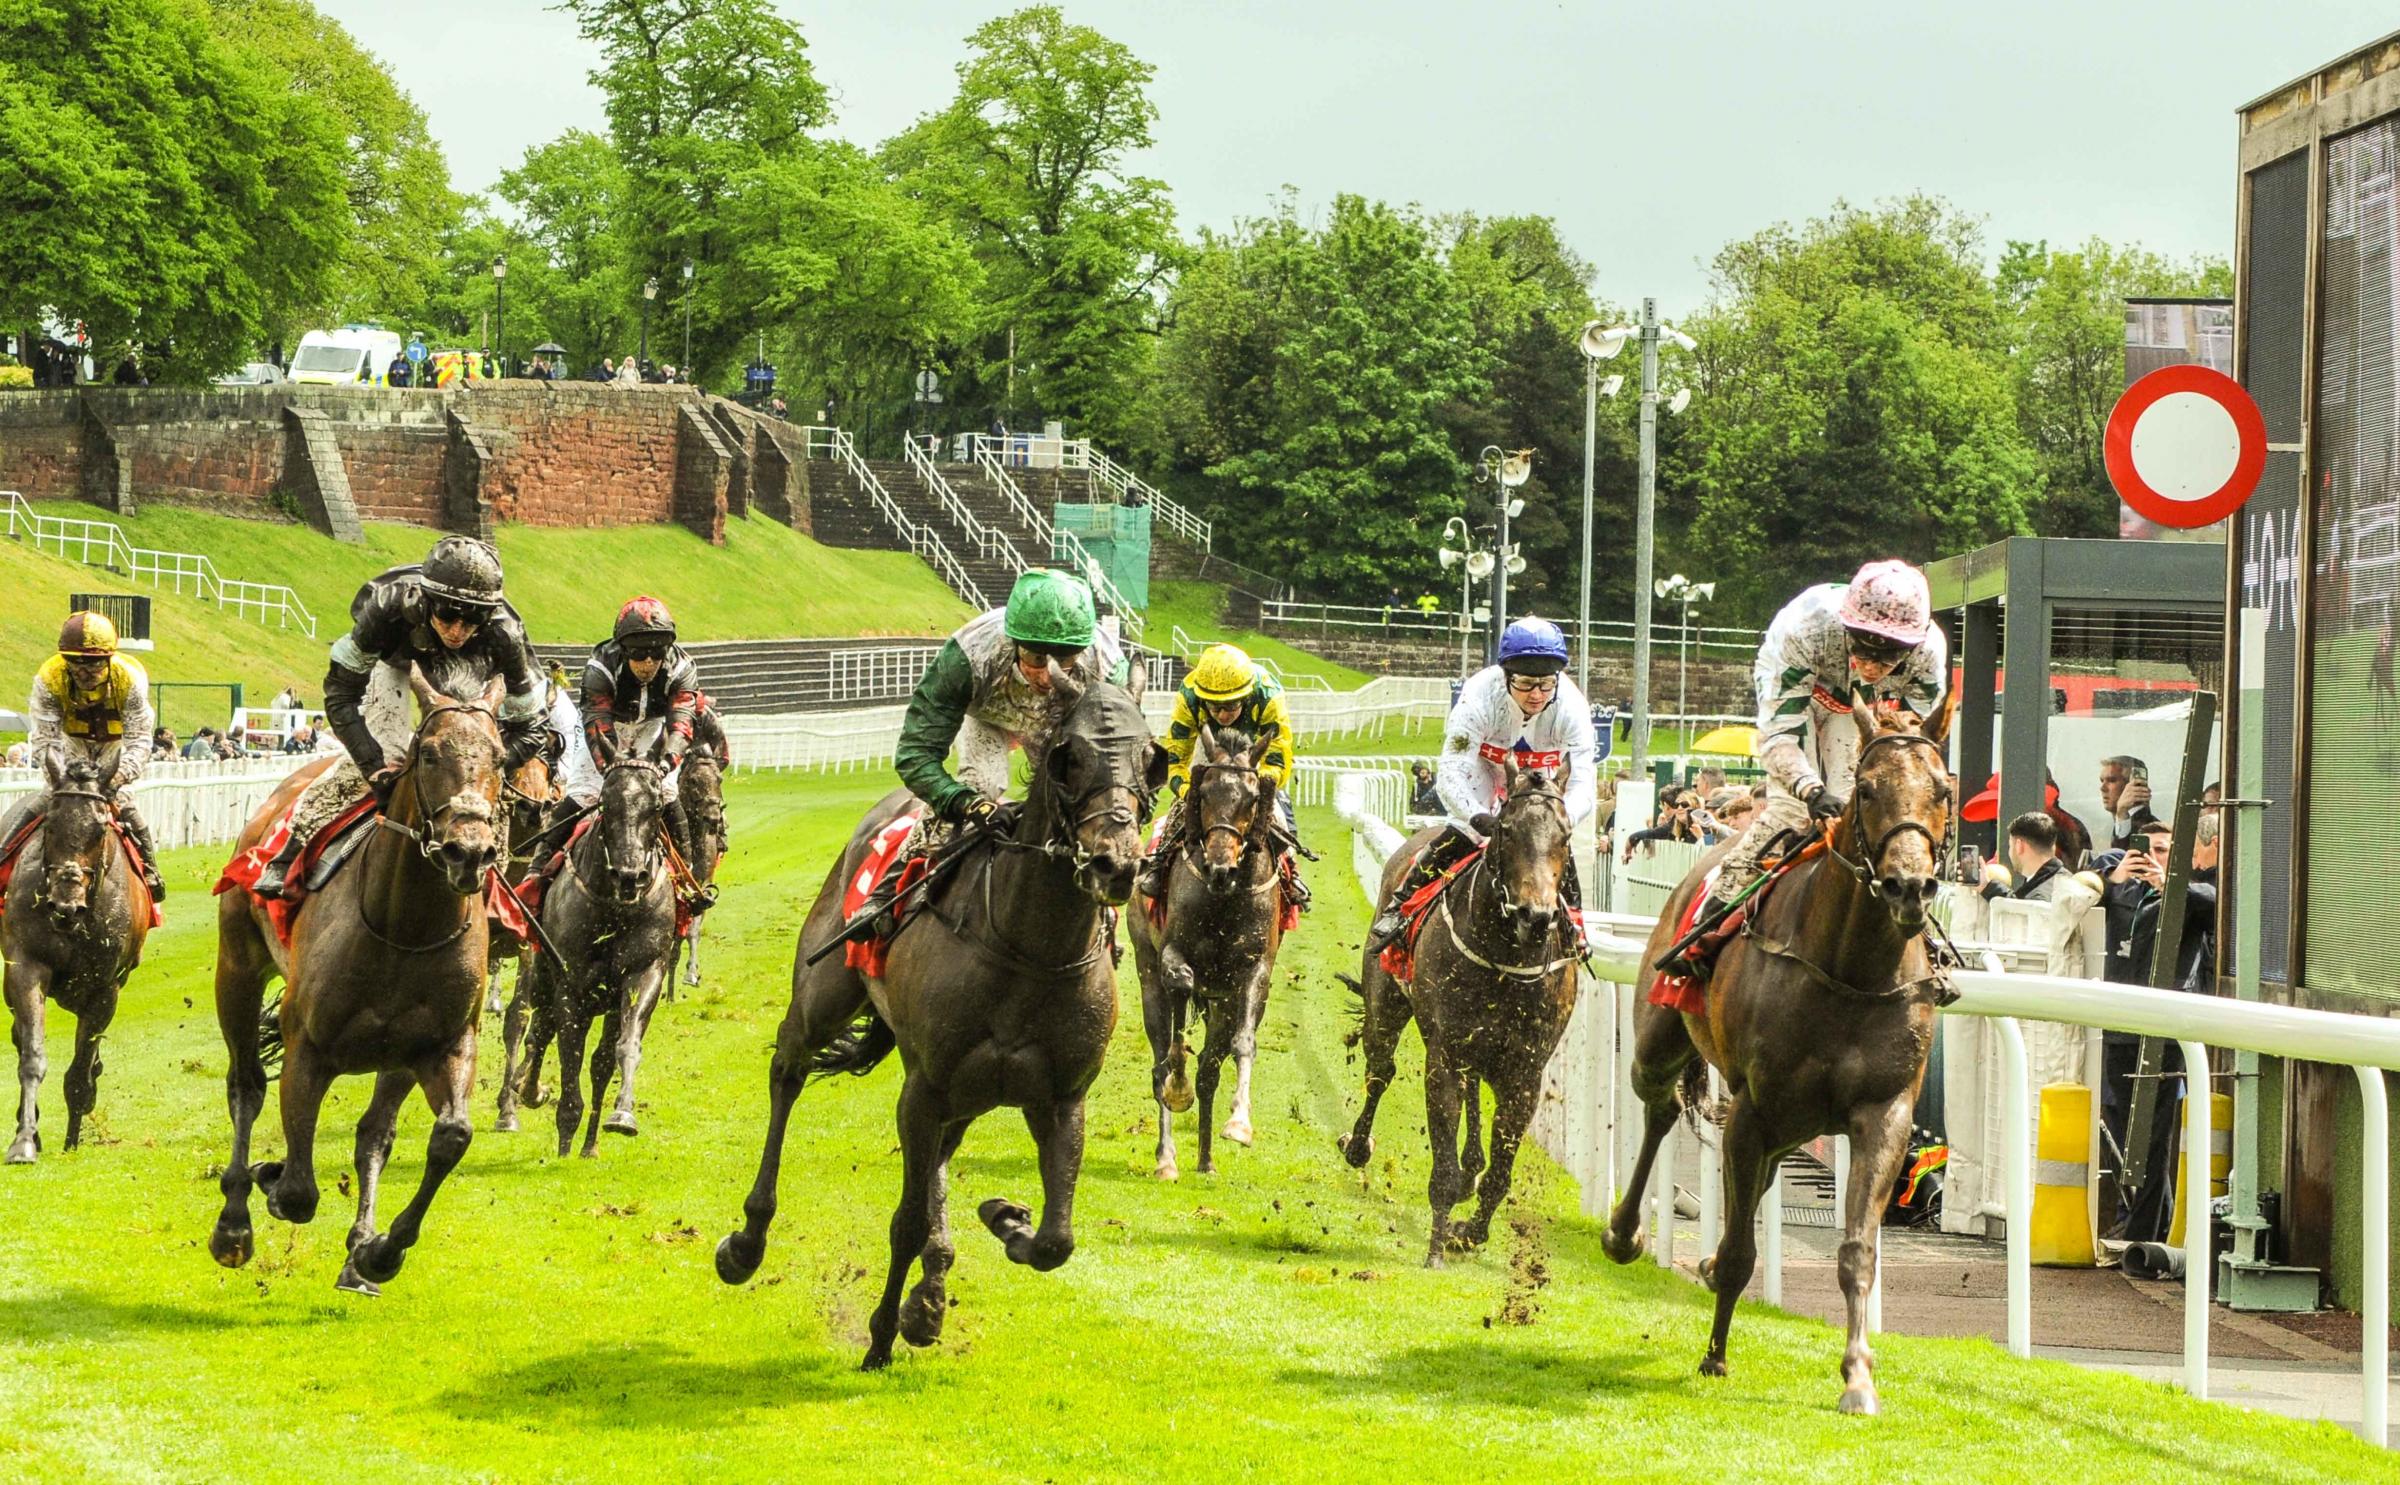 Chester Racecourse, Boodles May Festival City Day. Picture 2nd Race The tote £100K Guaranteed Placepot Every Day Handicap Stakes (Class 3) Winner No 5 Danger Alert Jockey William Buck. SW1052023.